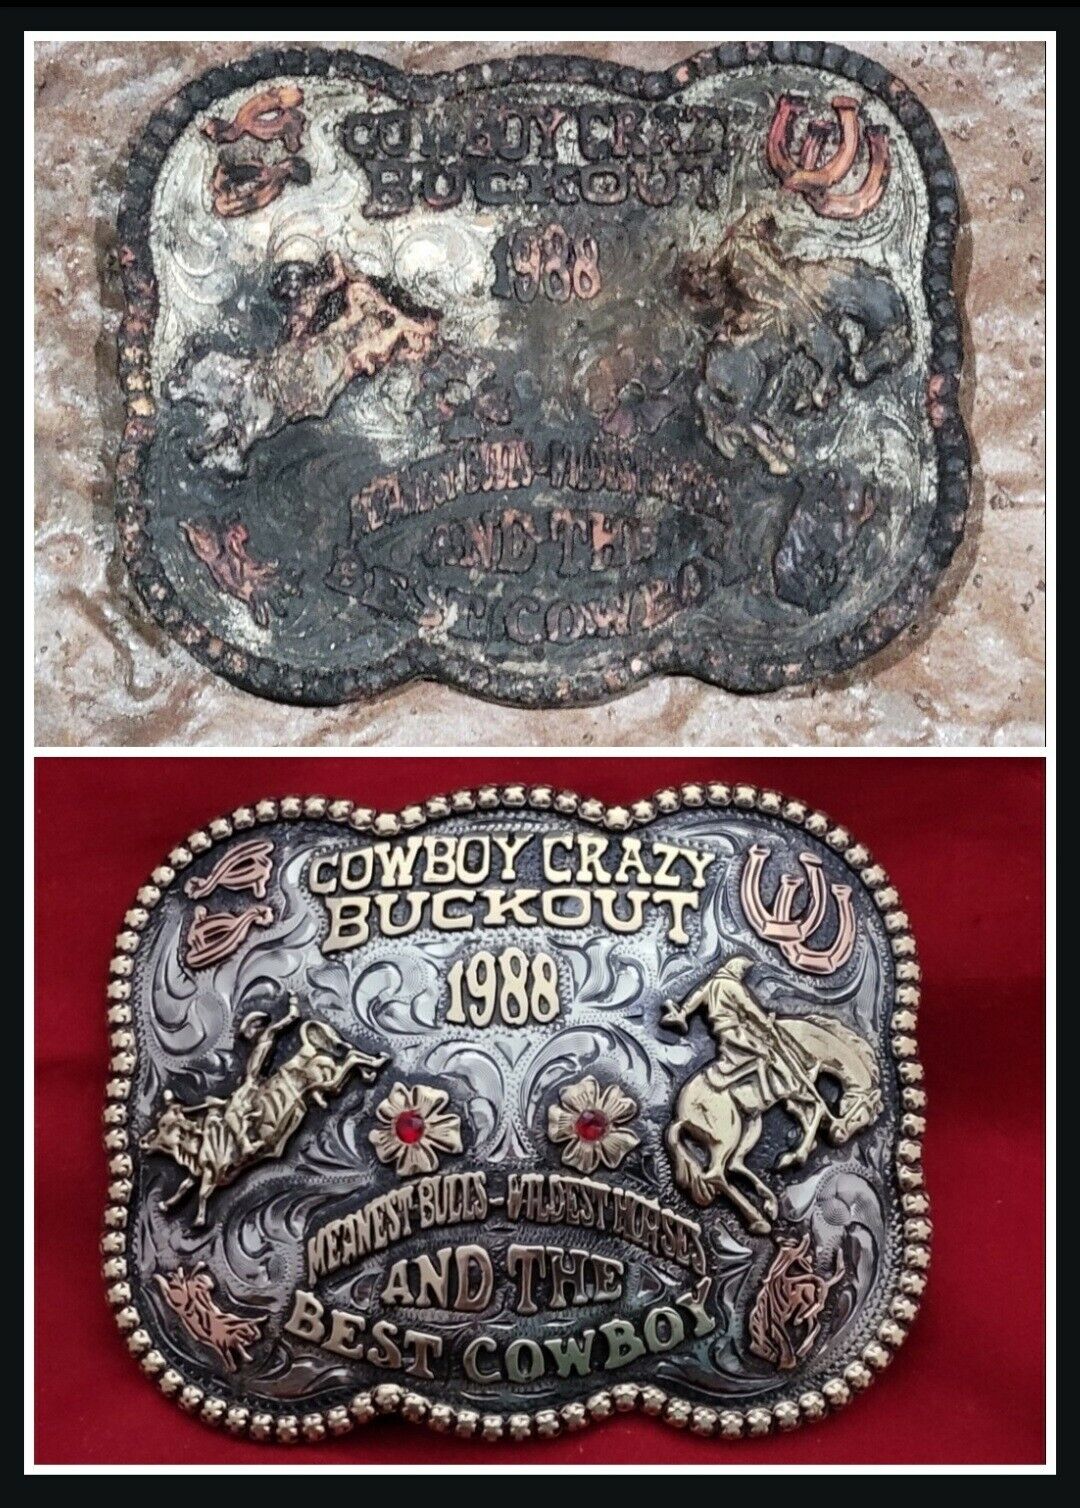 1 Custom made JUDGE LEO SMITH Rodeo Trophy Buckle◇REMAKE A LOST PAST TREASURE999